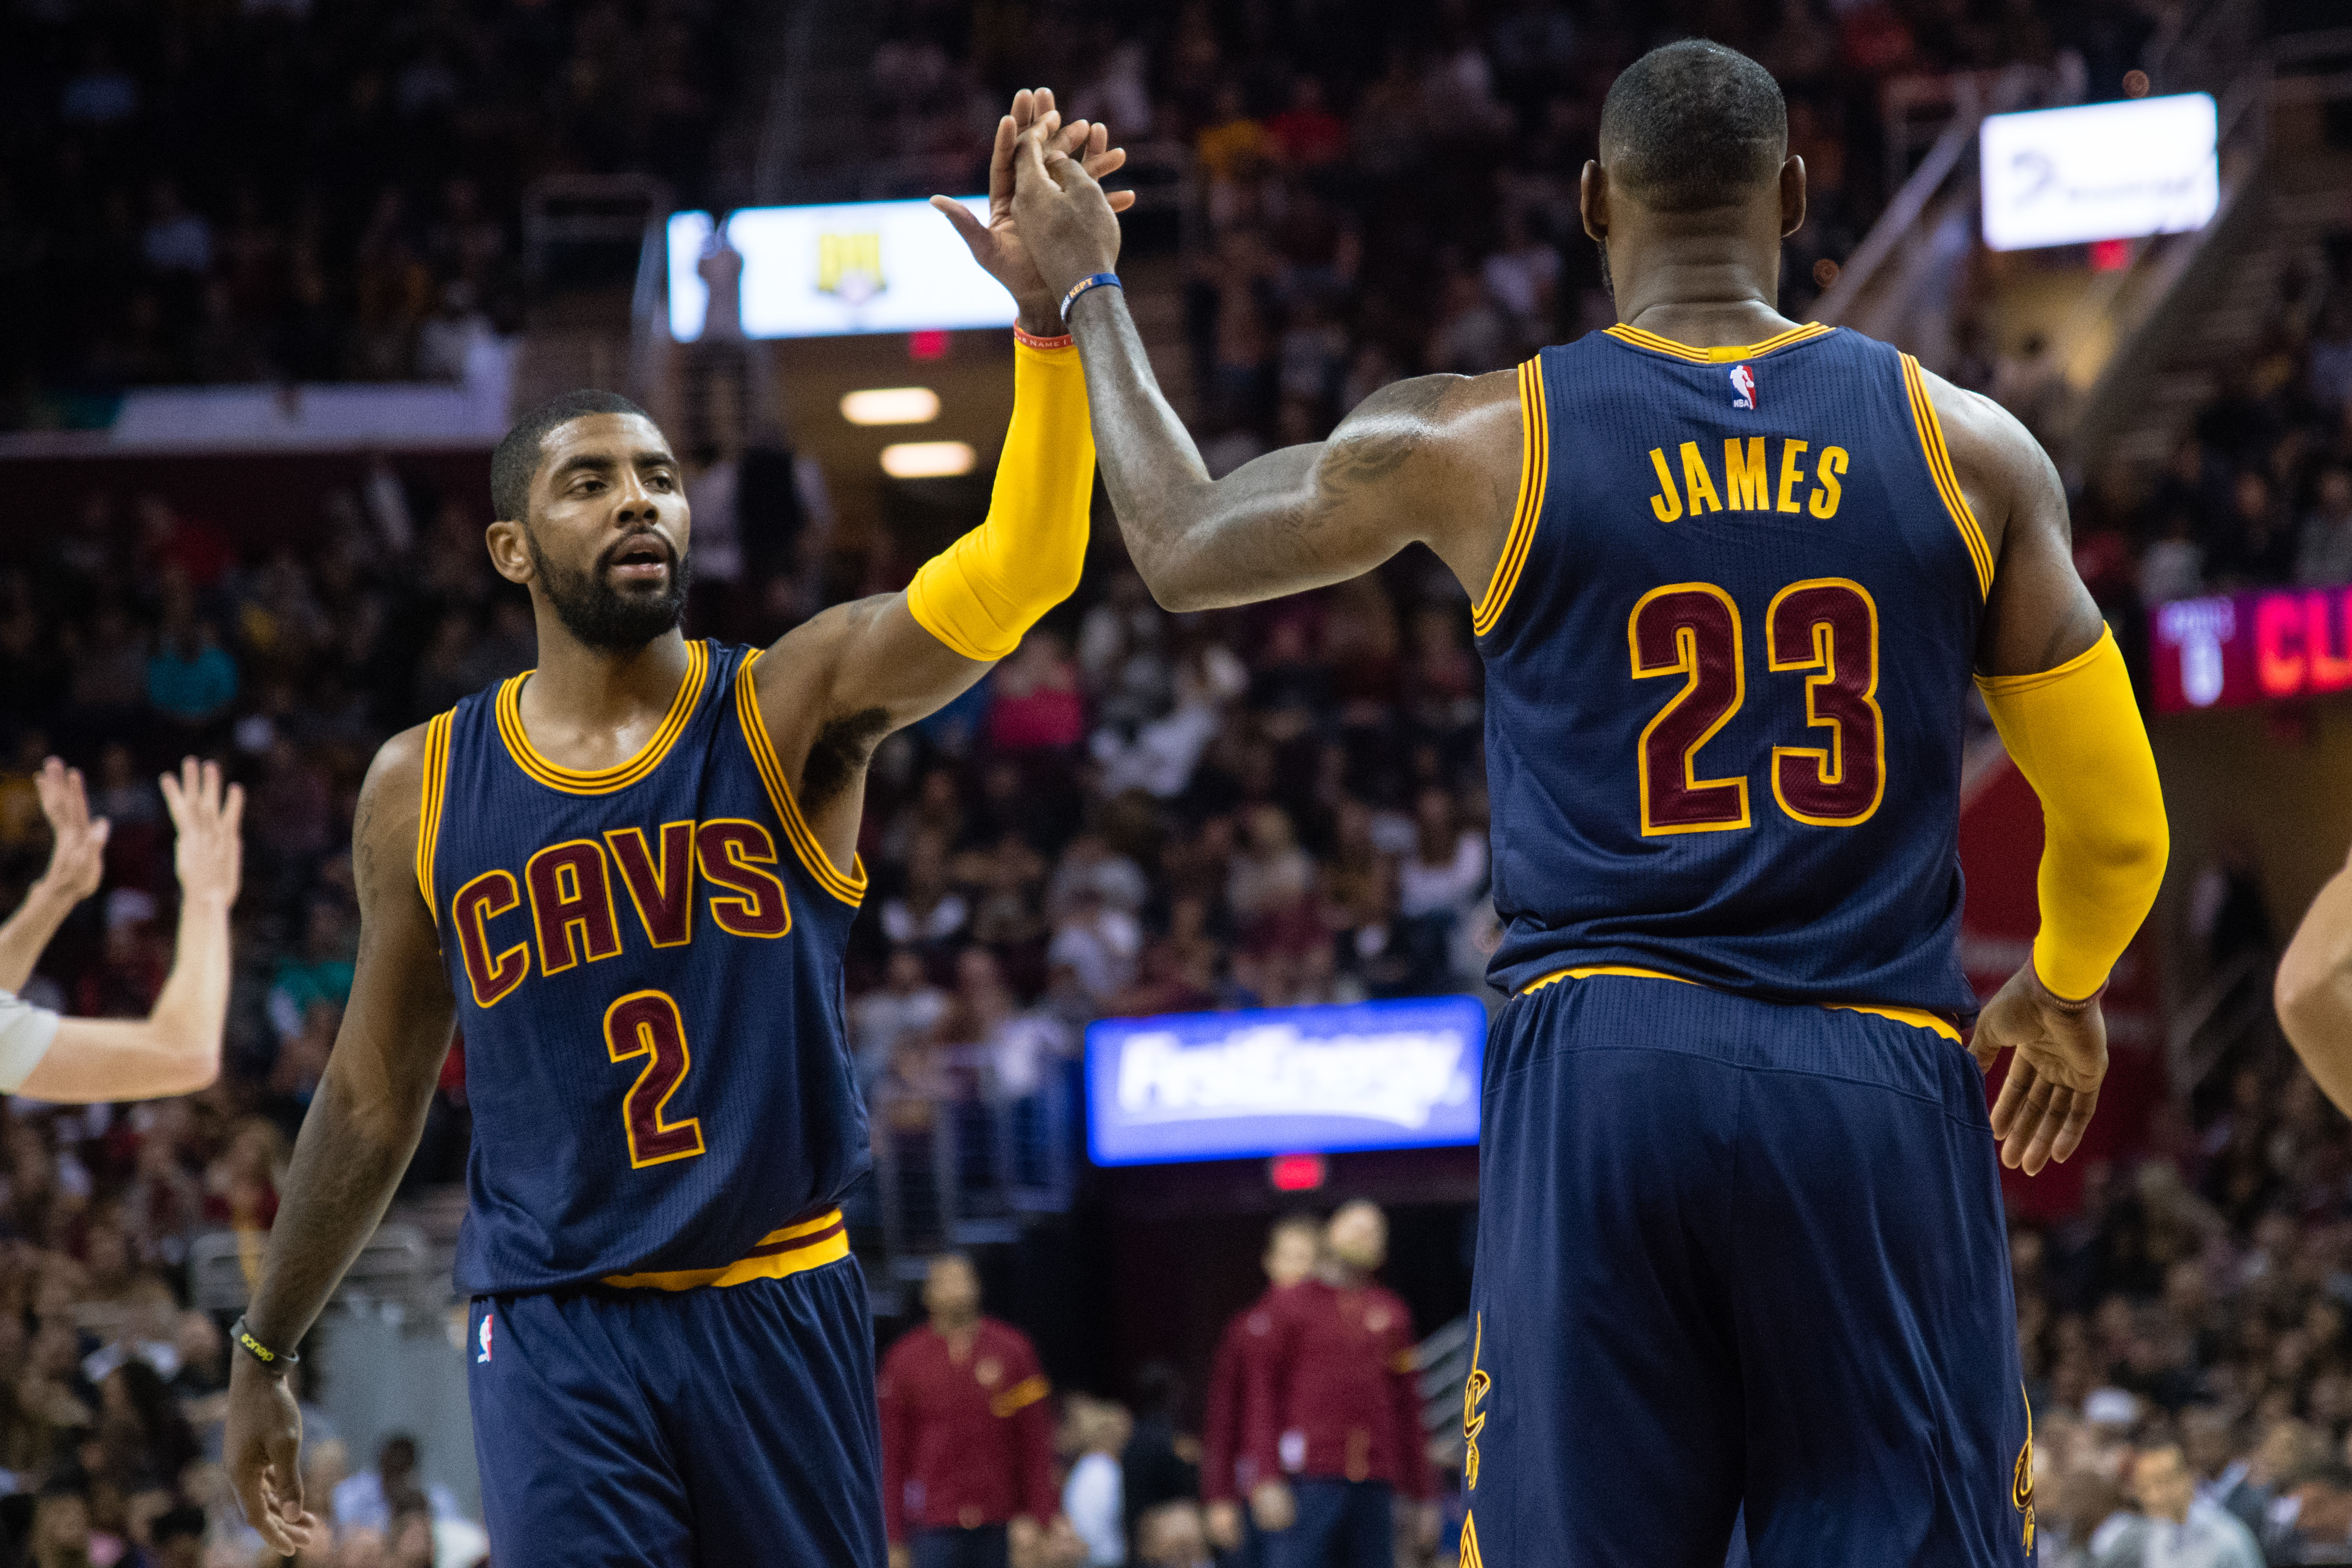 CLEVELAND, OH - NOVEMBER 03: Kyrie Irving #2 and LeBron James #23 of the Cleveland Cavaliers celebrate after scoring during the first half against the Boston Celtics at Quicken Loans Arena on November 3, 2016 in Cleveland, Ohio. NOTE TO USER: User expressly acknowledges and agrees that, by downloading and/or using this photograph, user is consenting to the terms and conditions of the Getty Images License Agreement. Mandatory copyright notice.   Jason Miller/Getty Images/AFP